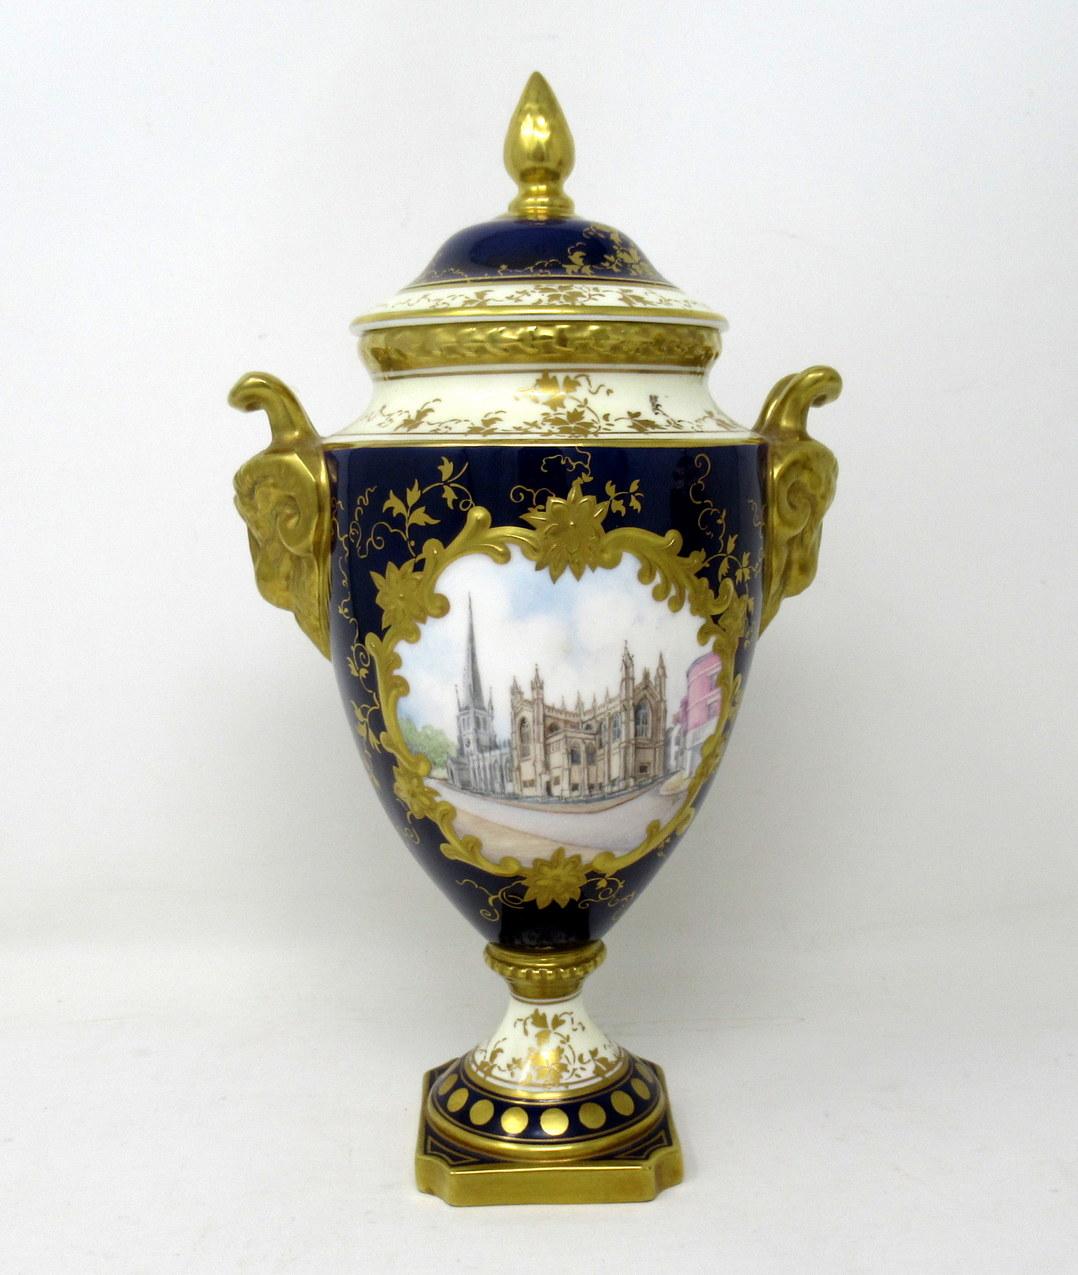 Fine pair of hand painted and signed English porcelain coalport limited edition lidded urns of traditional form with lavish gilded twin handles modelled as ram’s heads, complete with original finial covers, early 20th century.

One vase depicts a